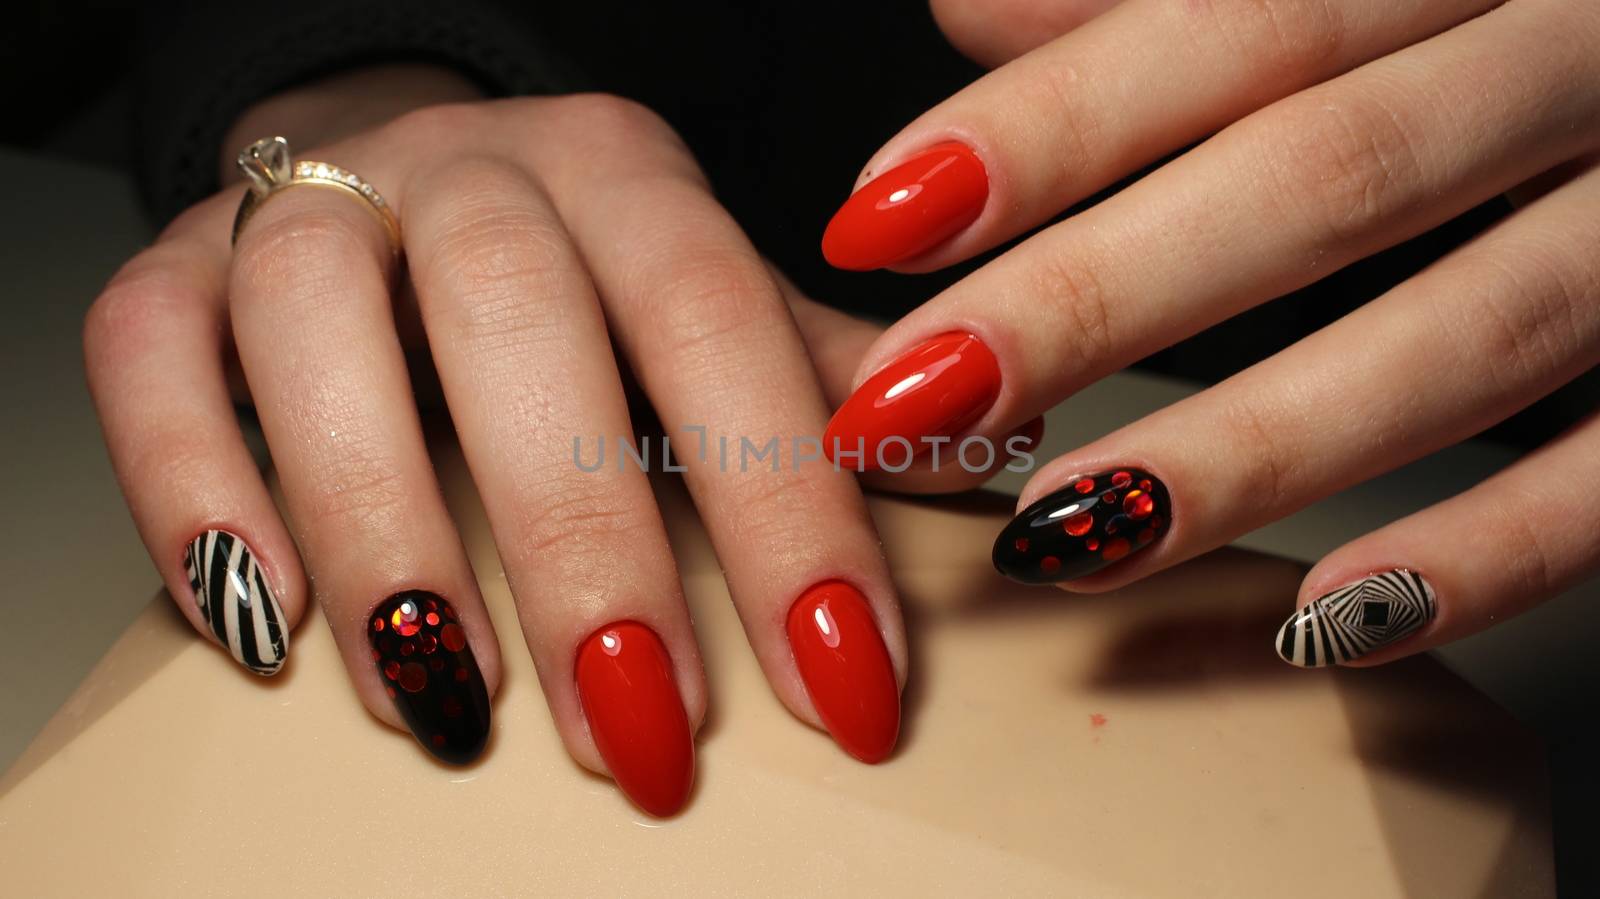 Manicure, design red with black and white geometric abstraction on nails